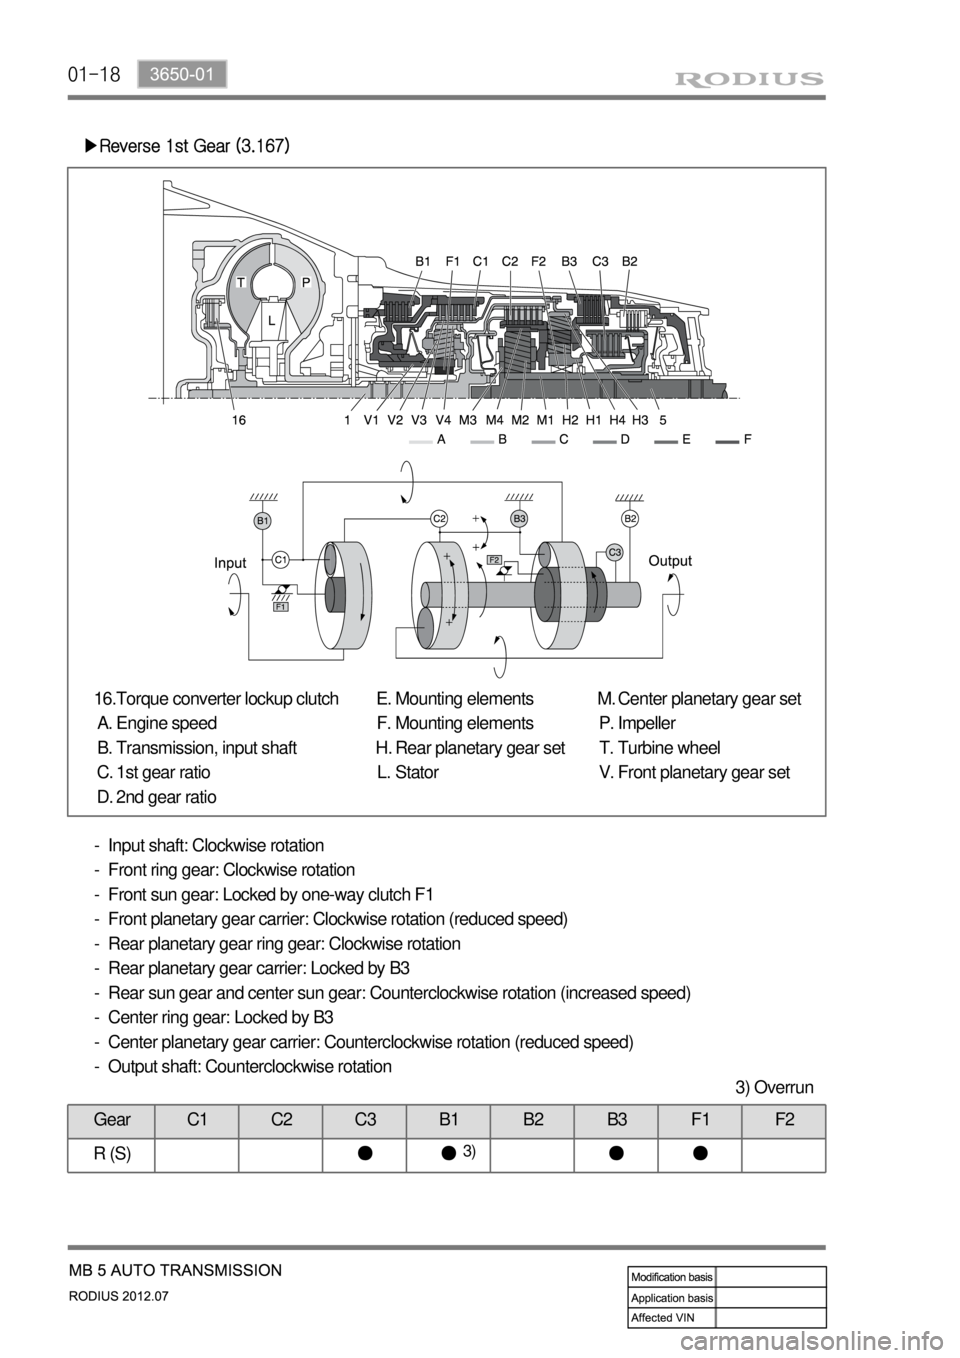 SSANGYONG RODIUS 2012  Service Manual 01-18
▶Reverse 1st Gear (3.167)
Torque converter lockup clutch
Engine speed
Transmission, input shaft
1st gear ratio
2nd gear ratio 16.
A.
B.
C.
D.Mounting elements
Mounting elements
Rear planetary 